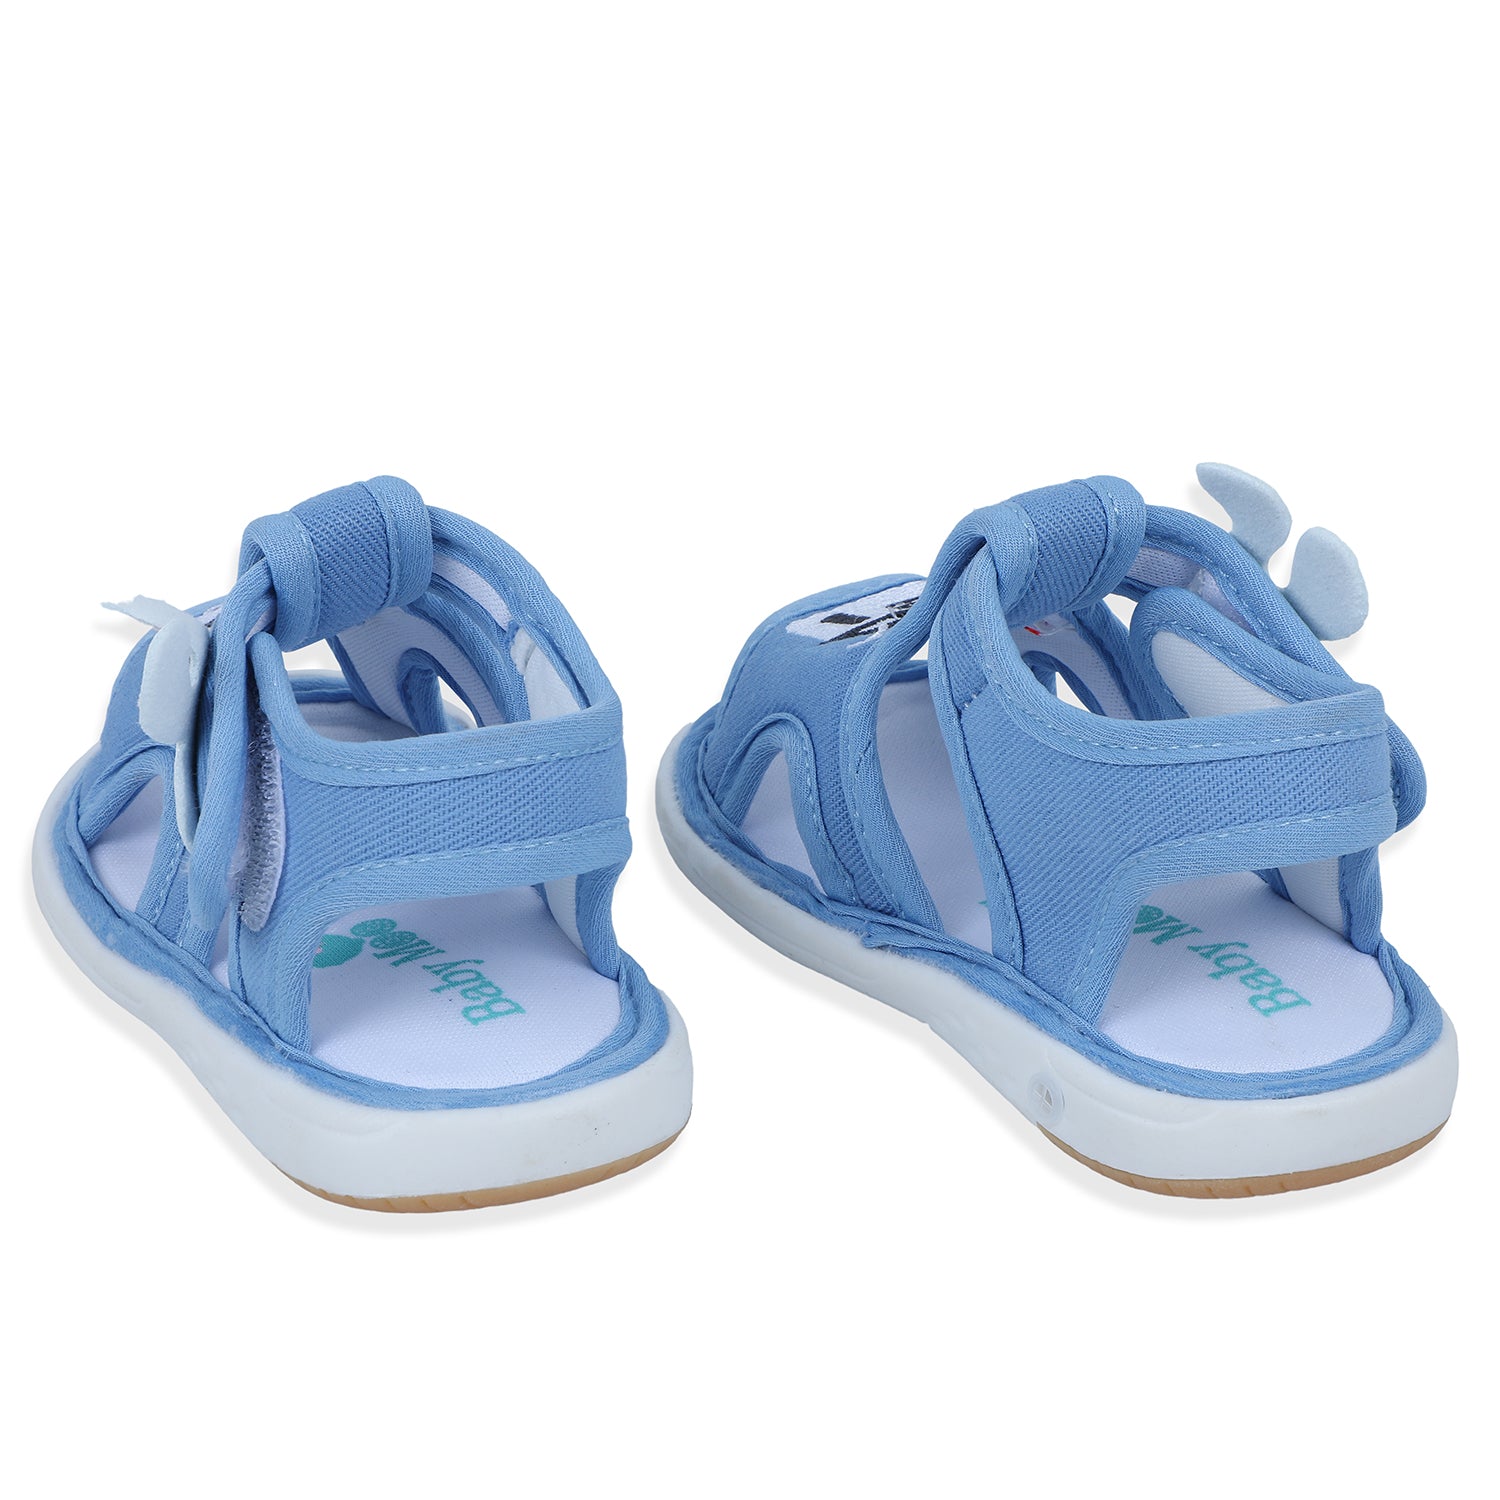 SYNIA Infant Baby Girls Boys Sandals Solid First Walking India | Ubuy